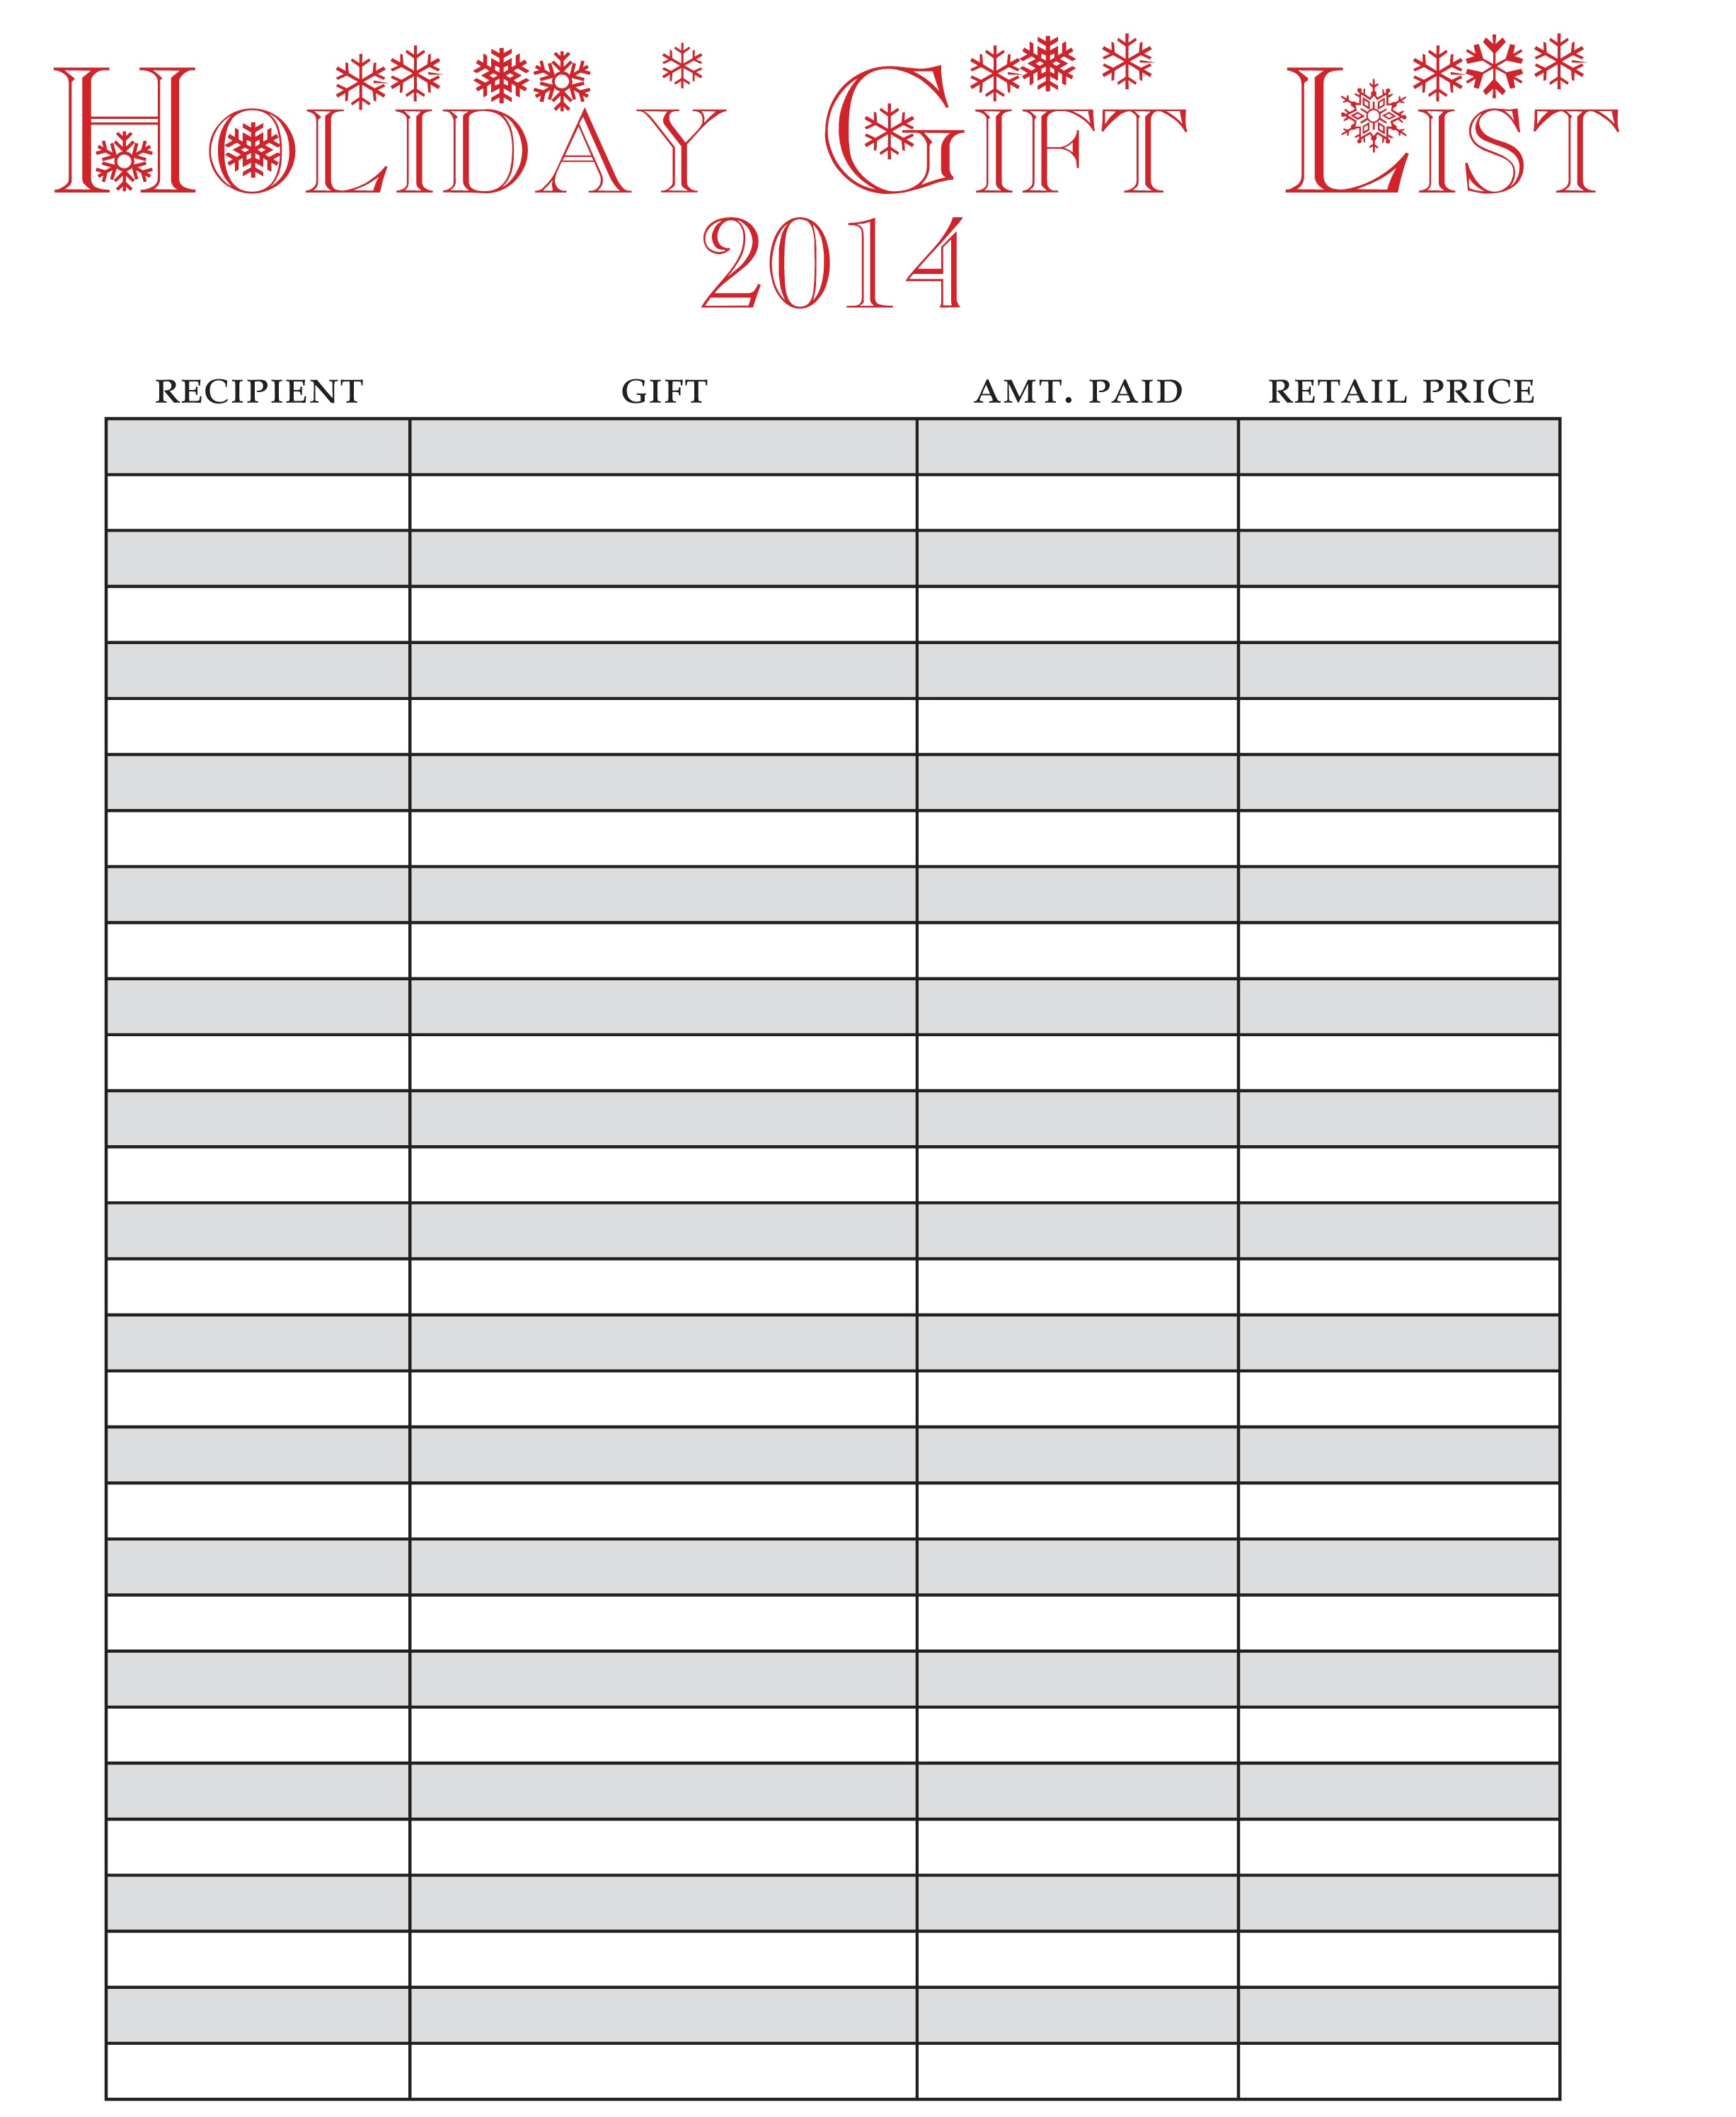 Holiday Gift List- Free Printable! » One Beautiful Home - Free Printable Gift List